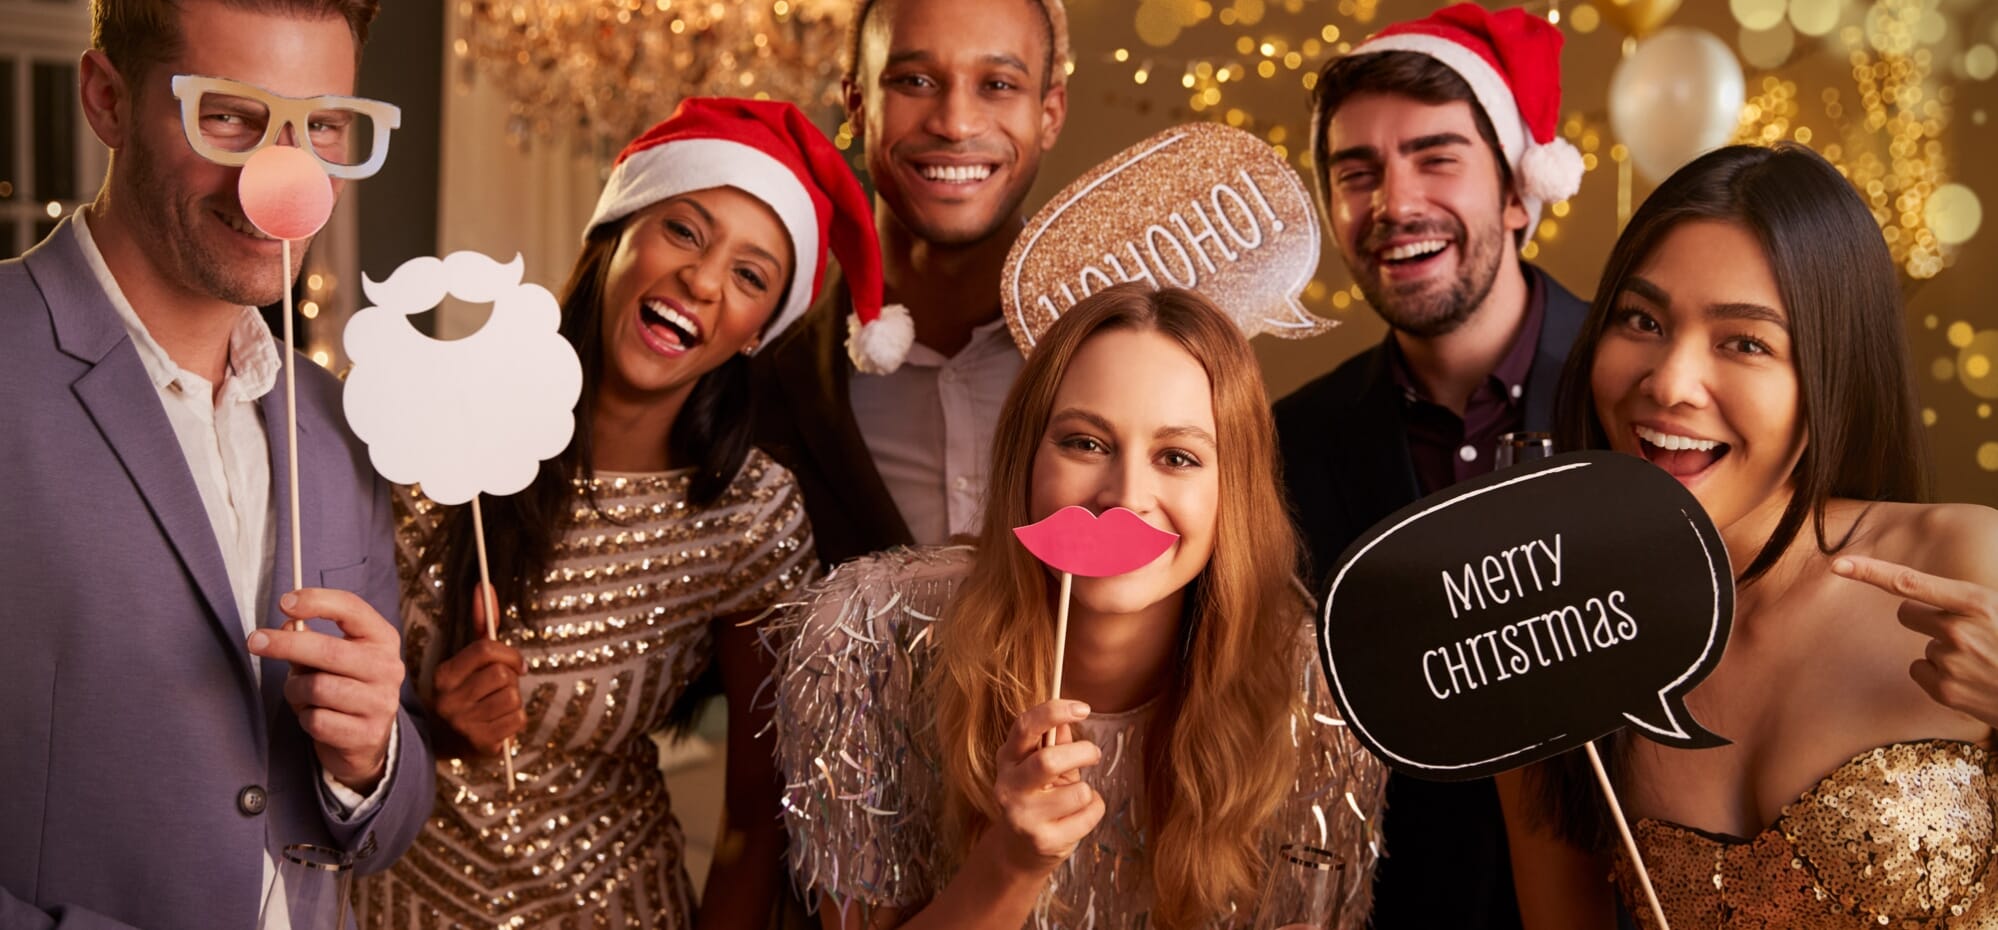 Capture memories with a holiday photo booth